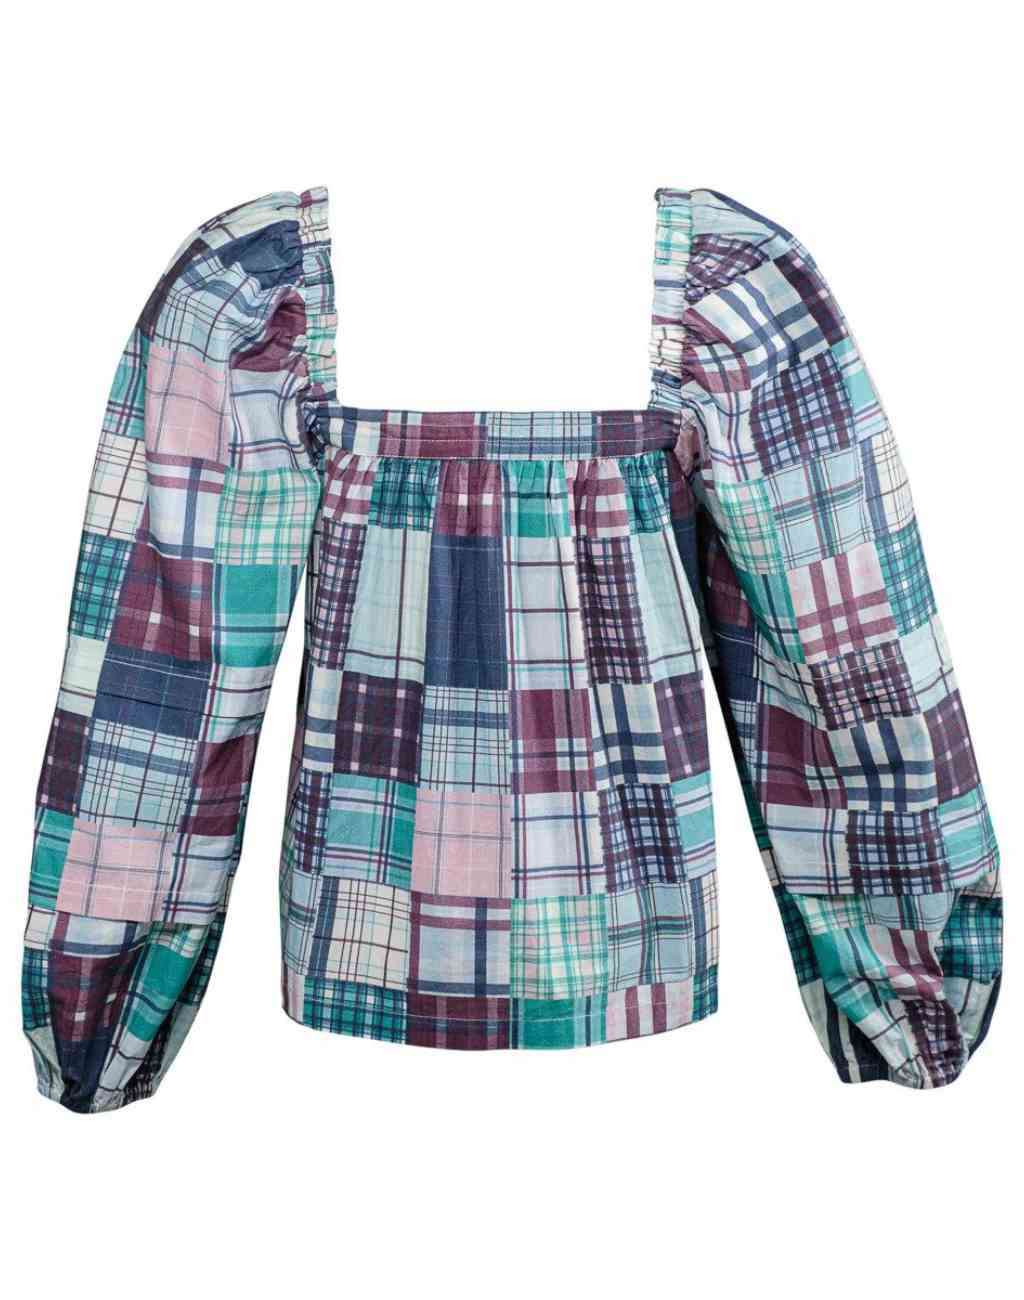 Martha Top in Plaid Patchwork with Oversized Puffed Sleeves